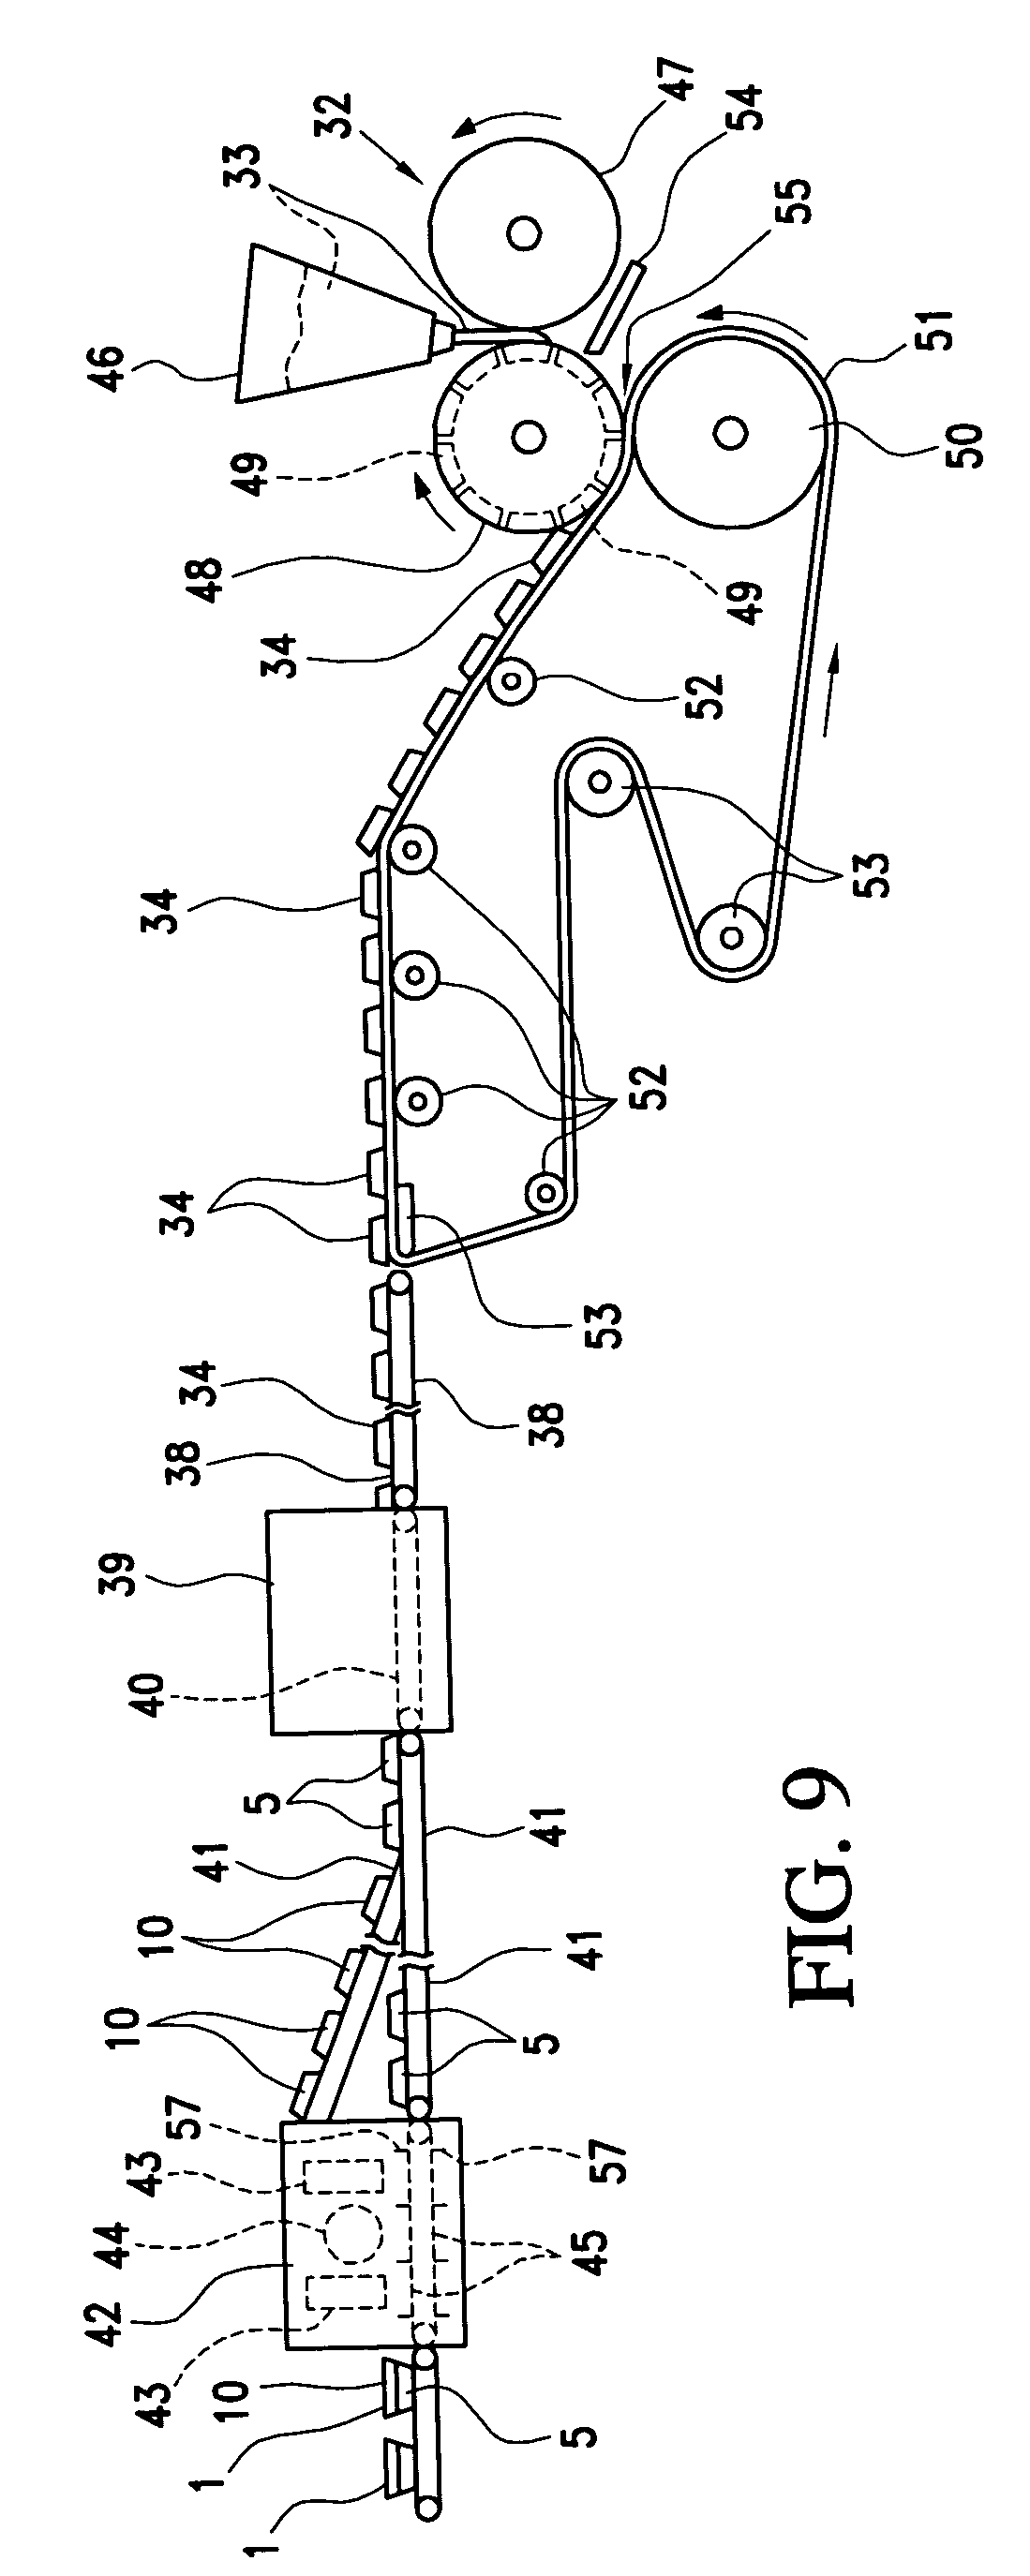 Apparatus and method for producing sandwich cookie having dissimilarly-sized base cakes